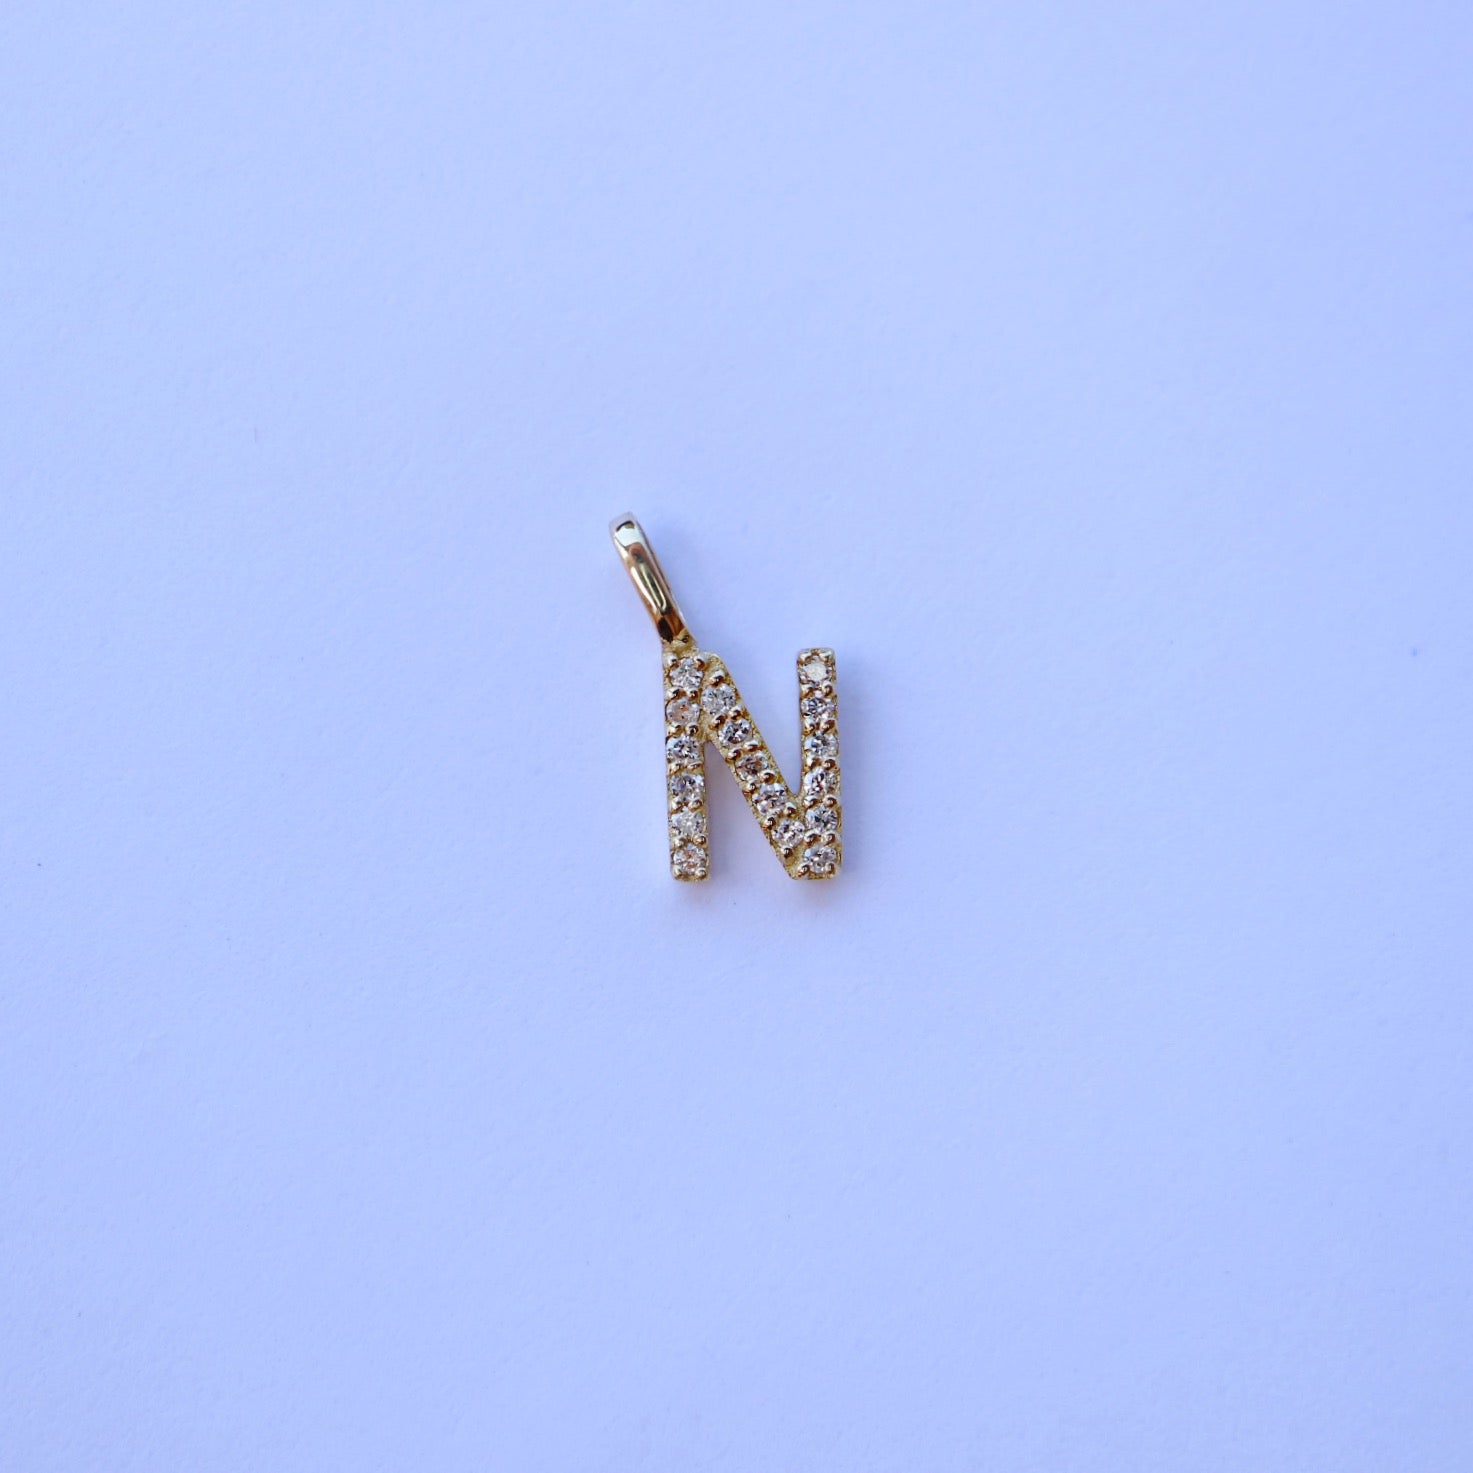 9kt gold and diamond initial pendants by Collective & Co.